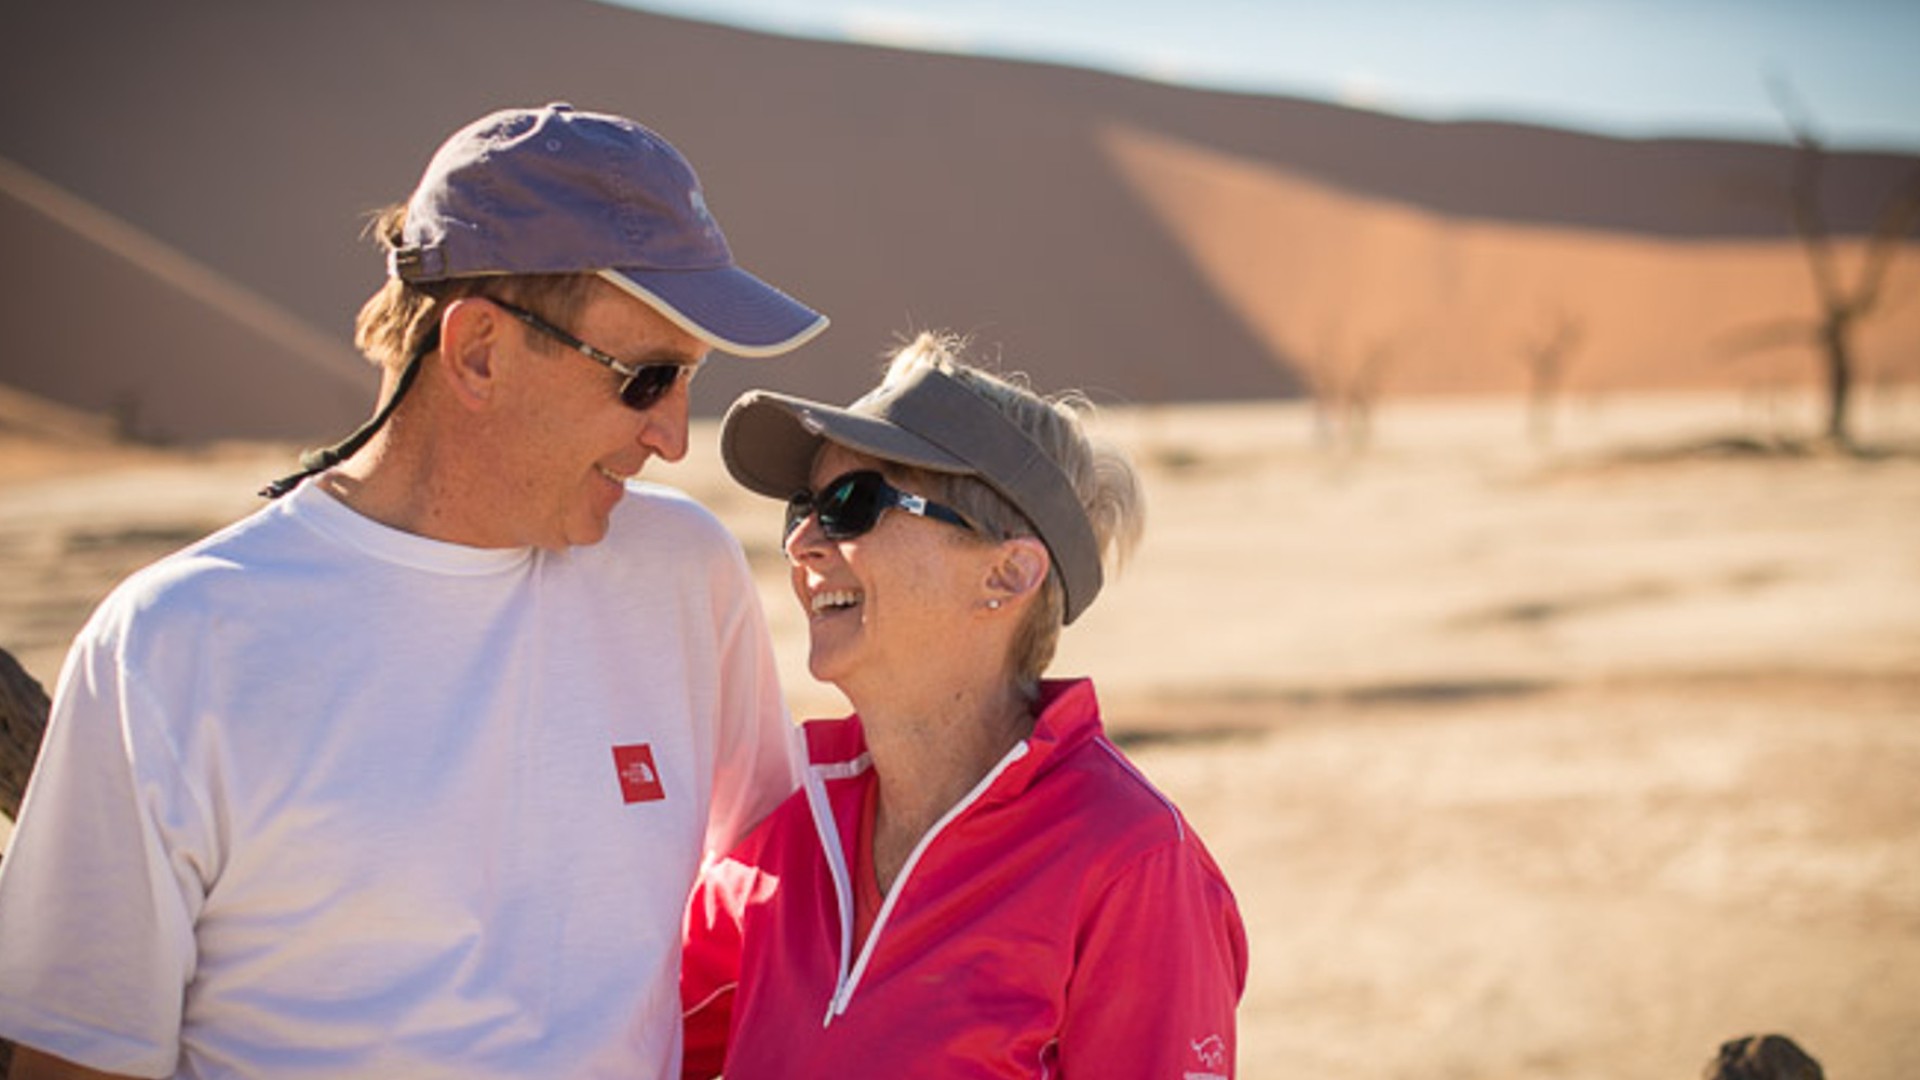 A man and woman both wearing visors standing next to each other and smiling while standing outside their safari car in Namibia